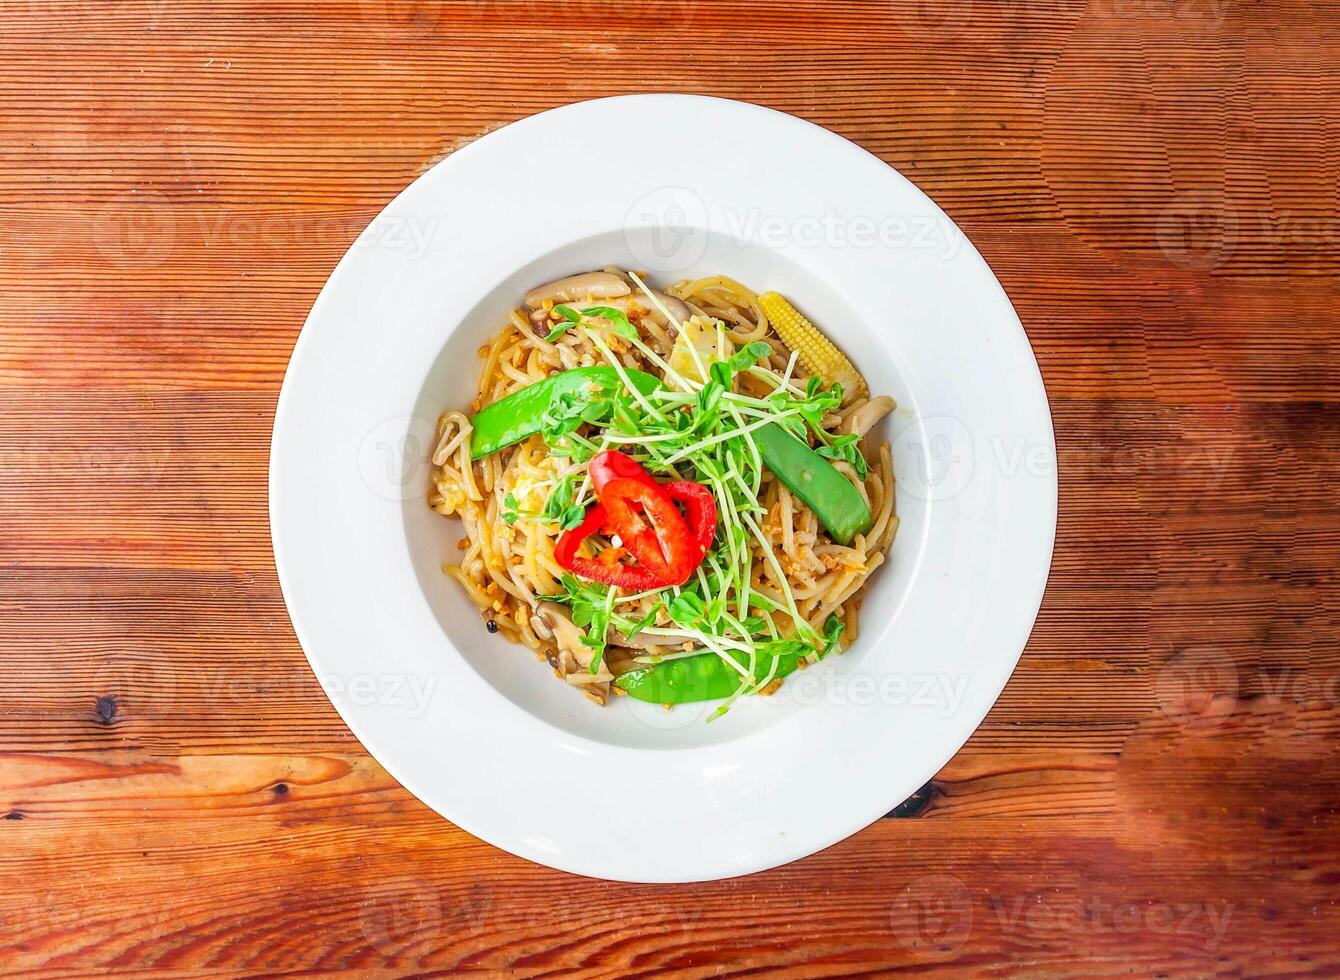 vegetable aglio e olio with baby corn, mushroom and tomato served in dish isolated on wooden table top view of hong kong food photo